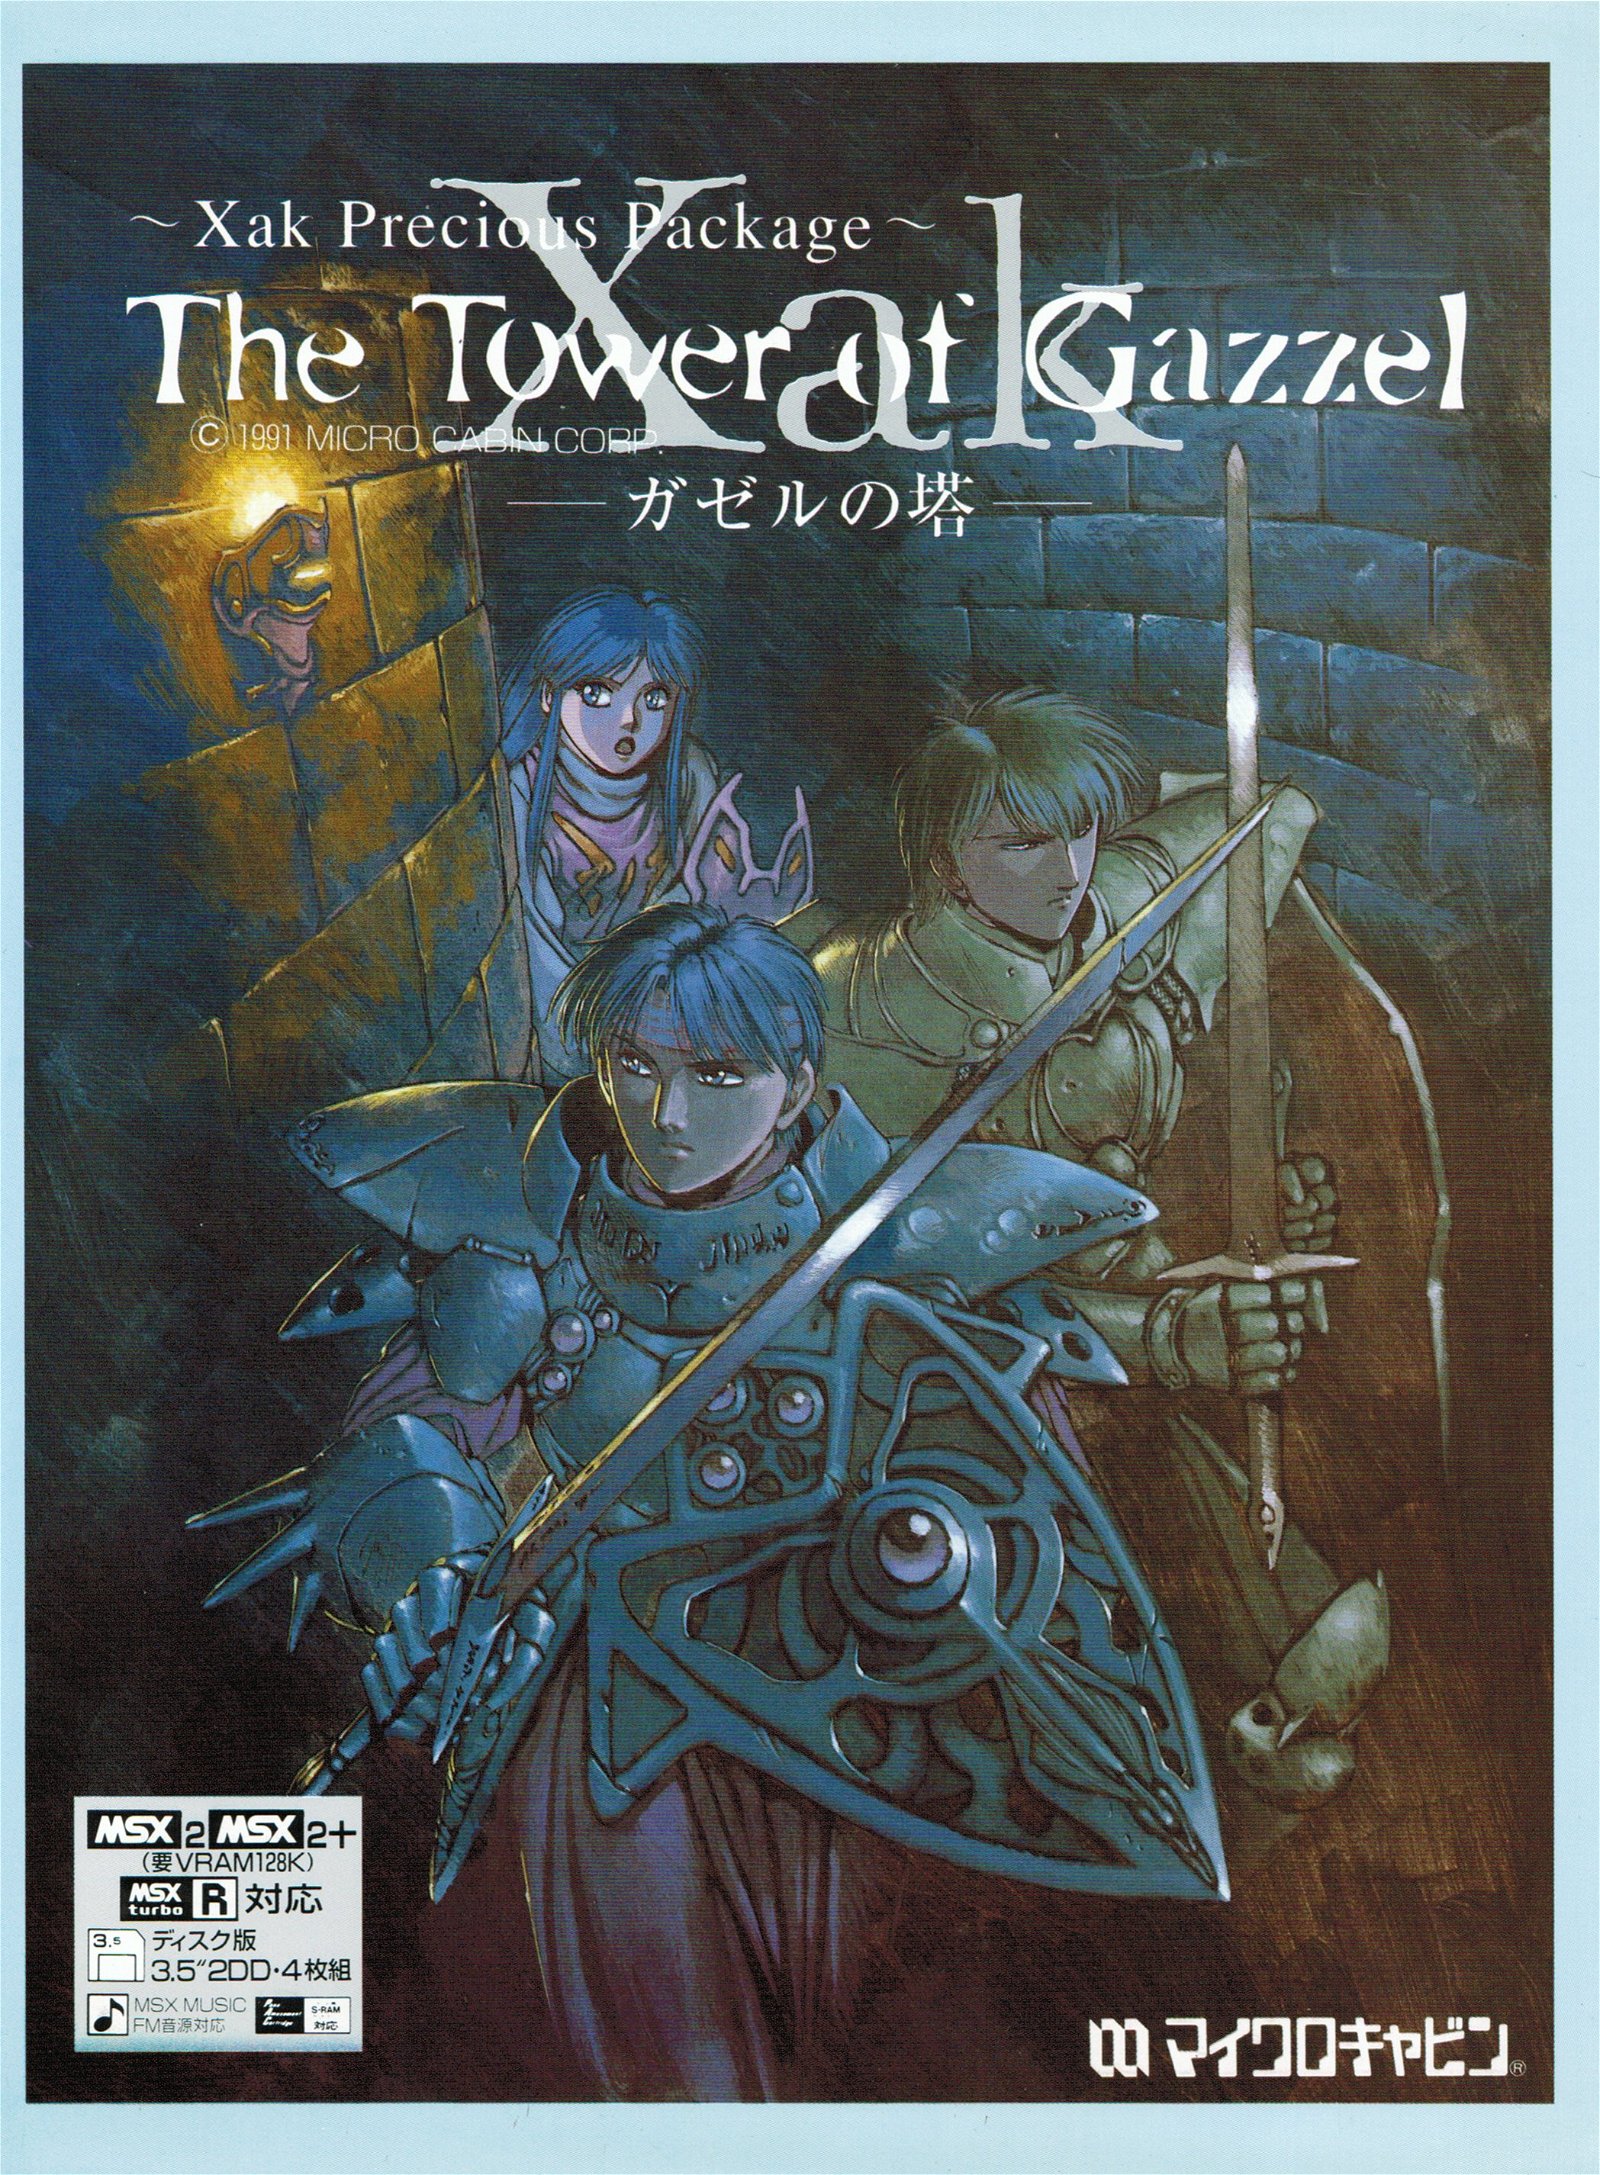 Image of Xak Precious Package: The Tower of Gazzel